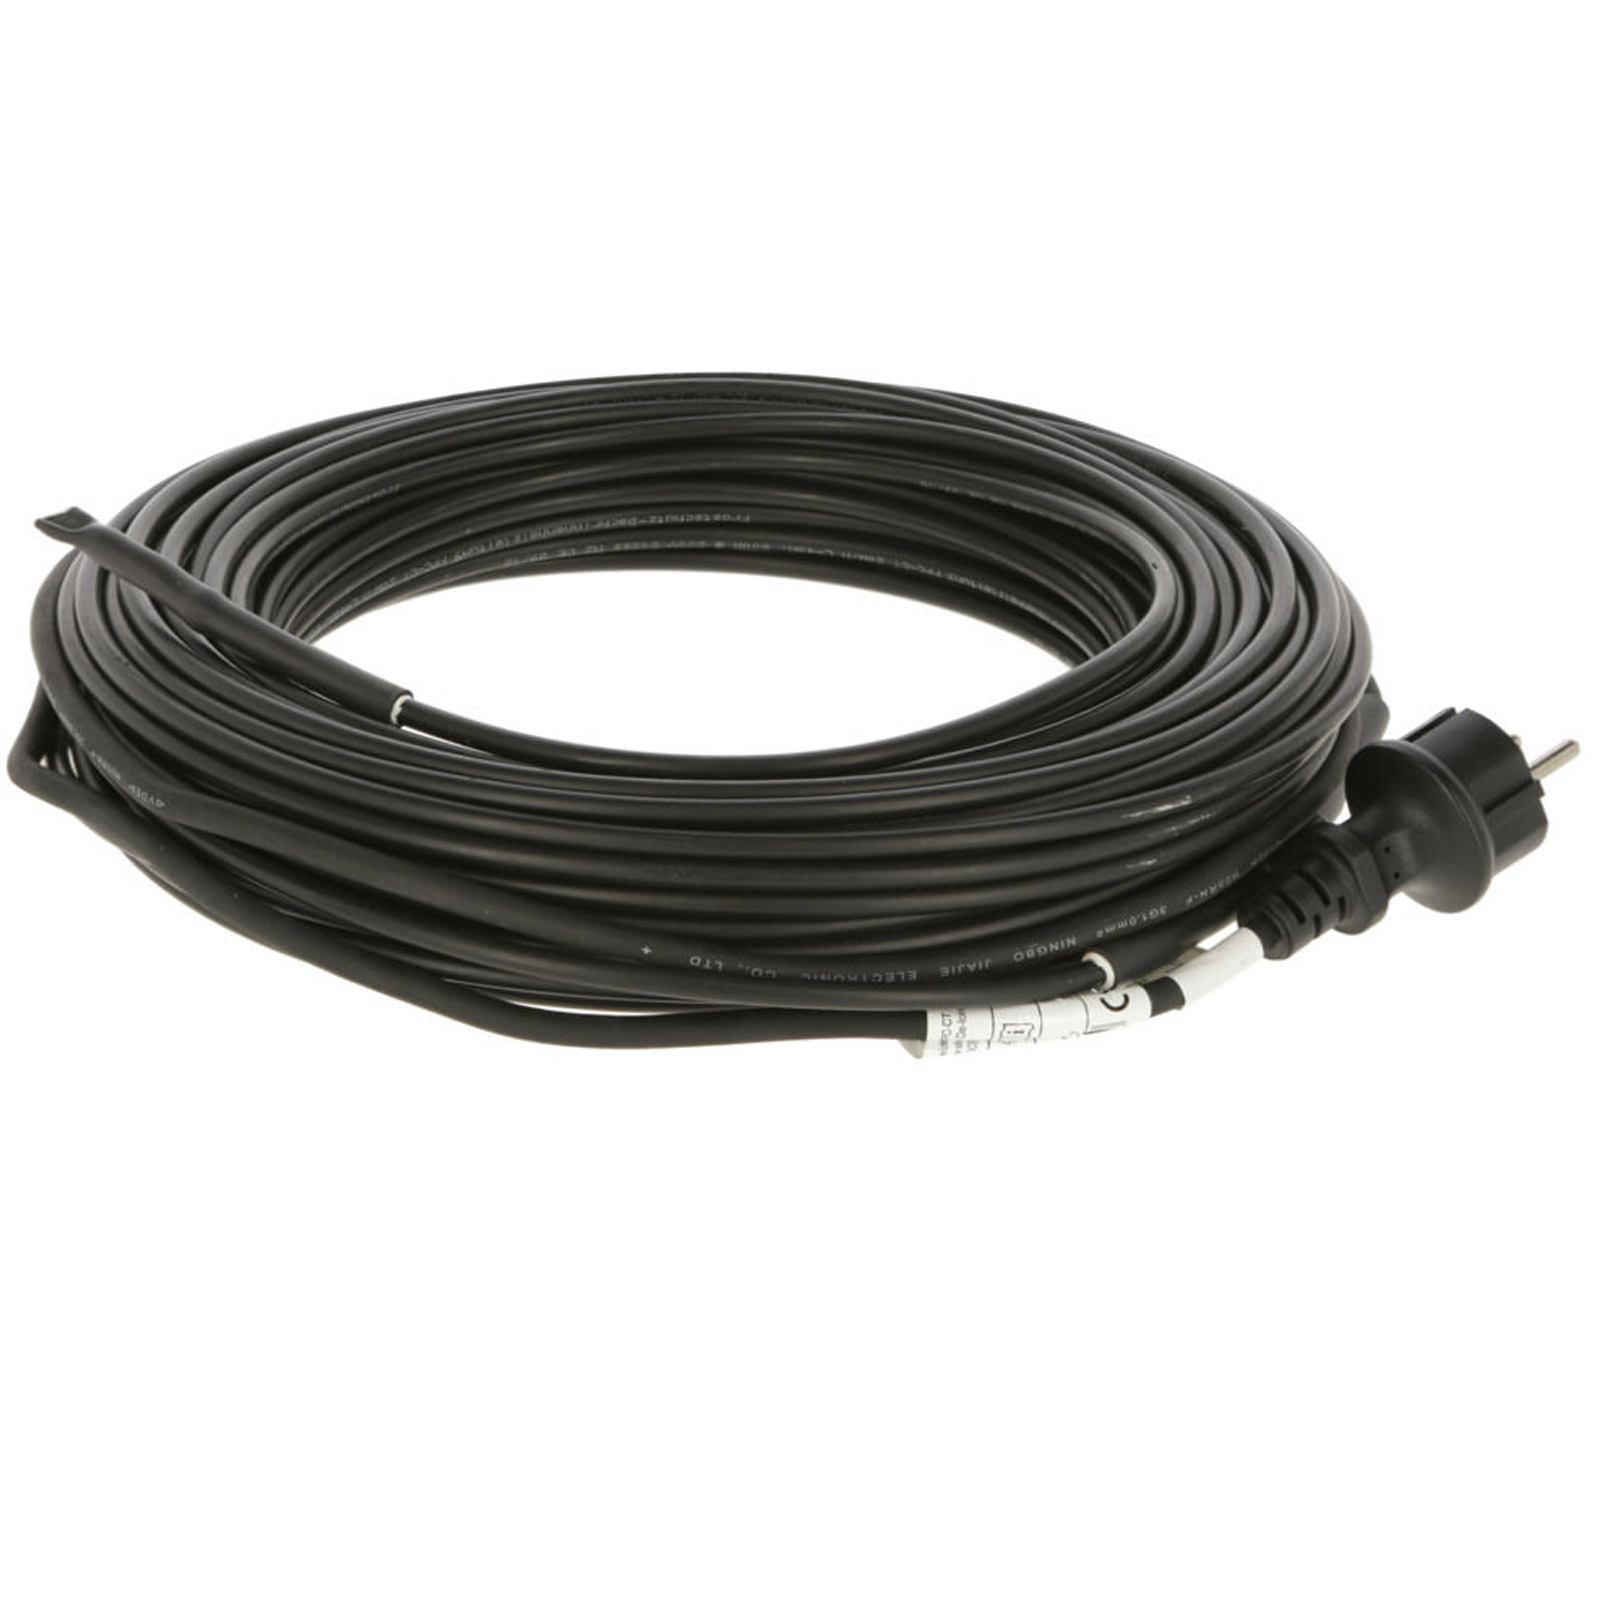 Kerbl Frost protection heating cable for gutters and pipes